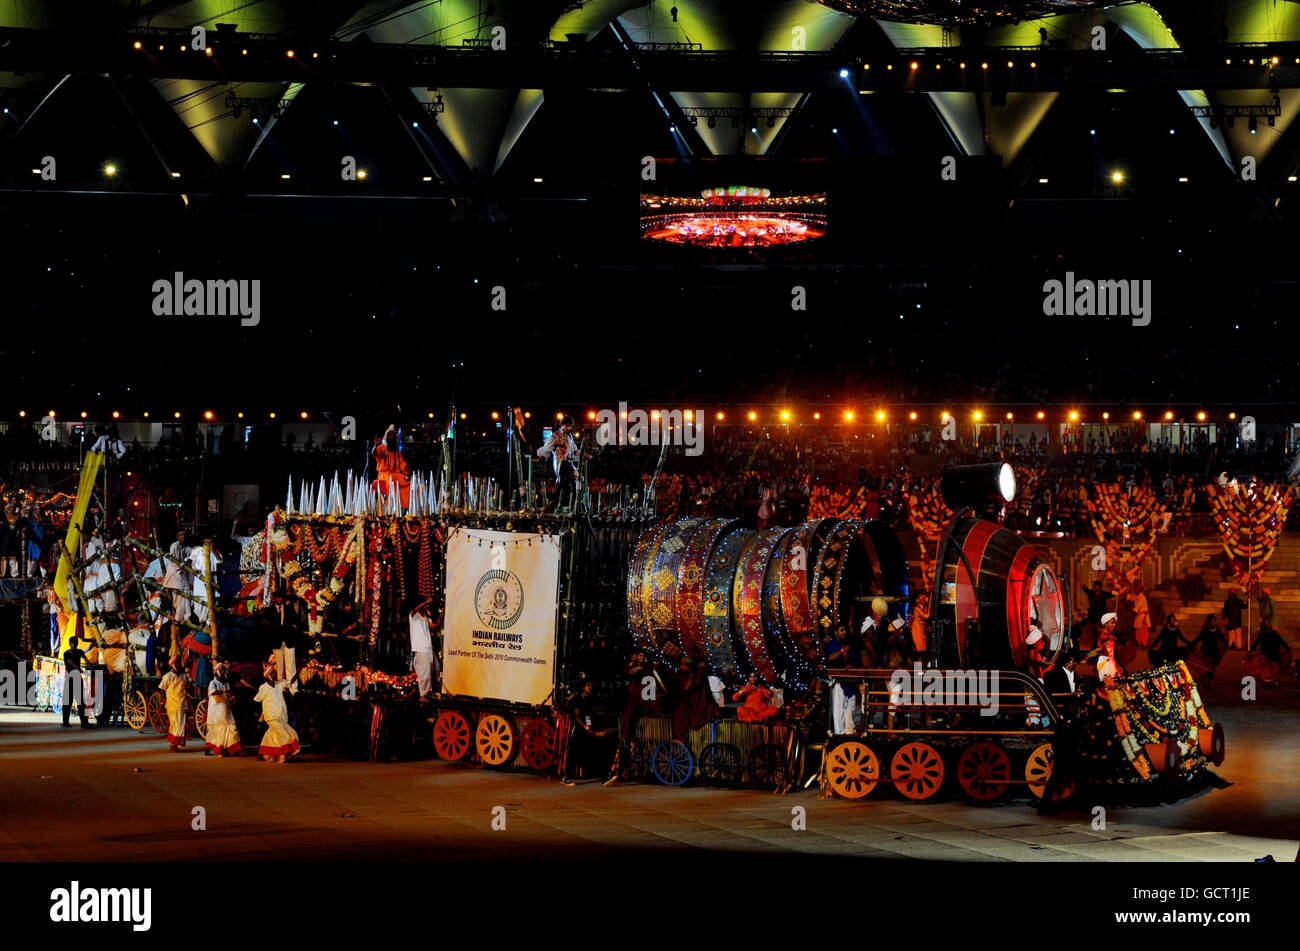 Performers during the 2010 Commonwealth Games opening ceremony at the Jawaharlal Nehru Stadium in New Delhi, India. Stock Photo